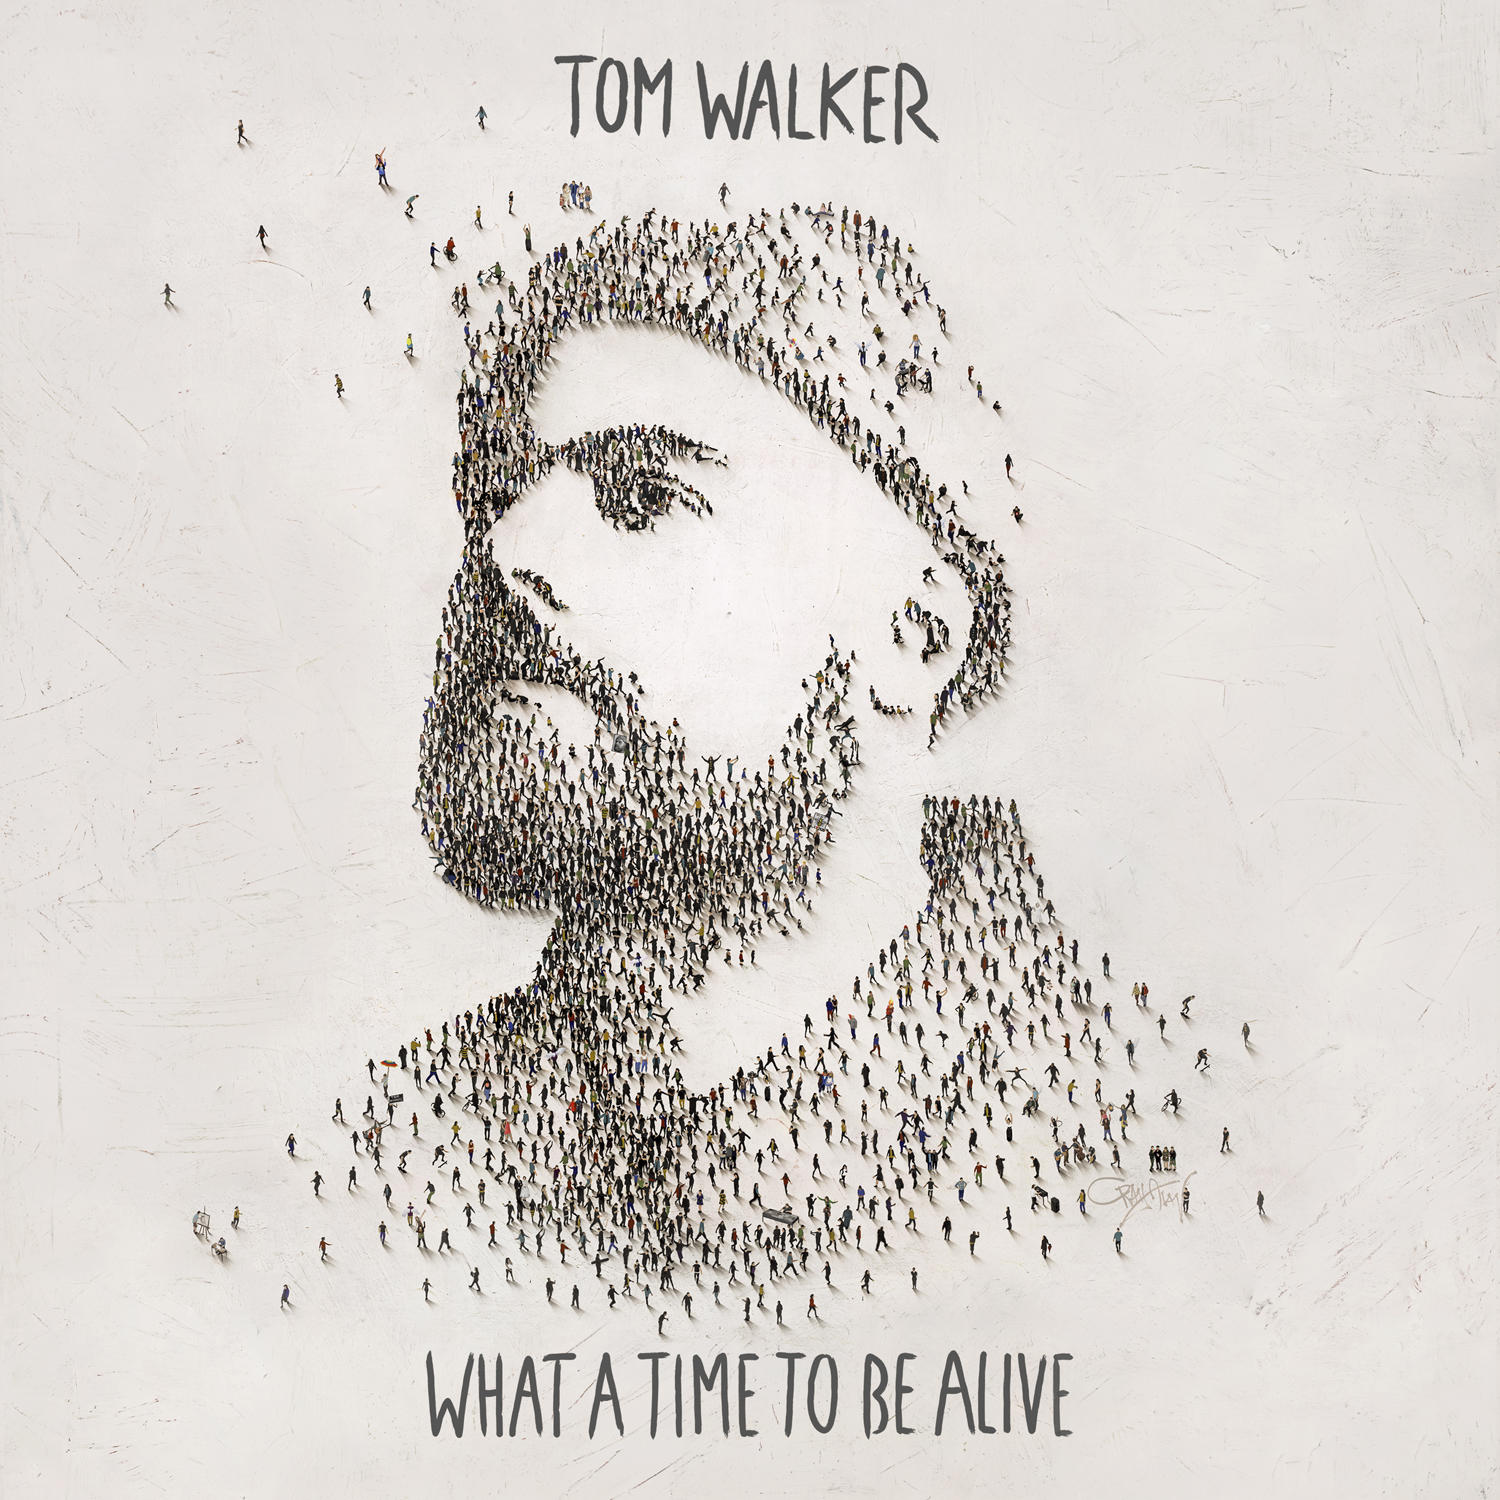 Tom Walker - What - Alive (CD) a To Time Be